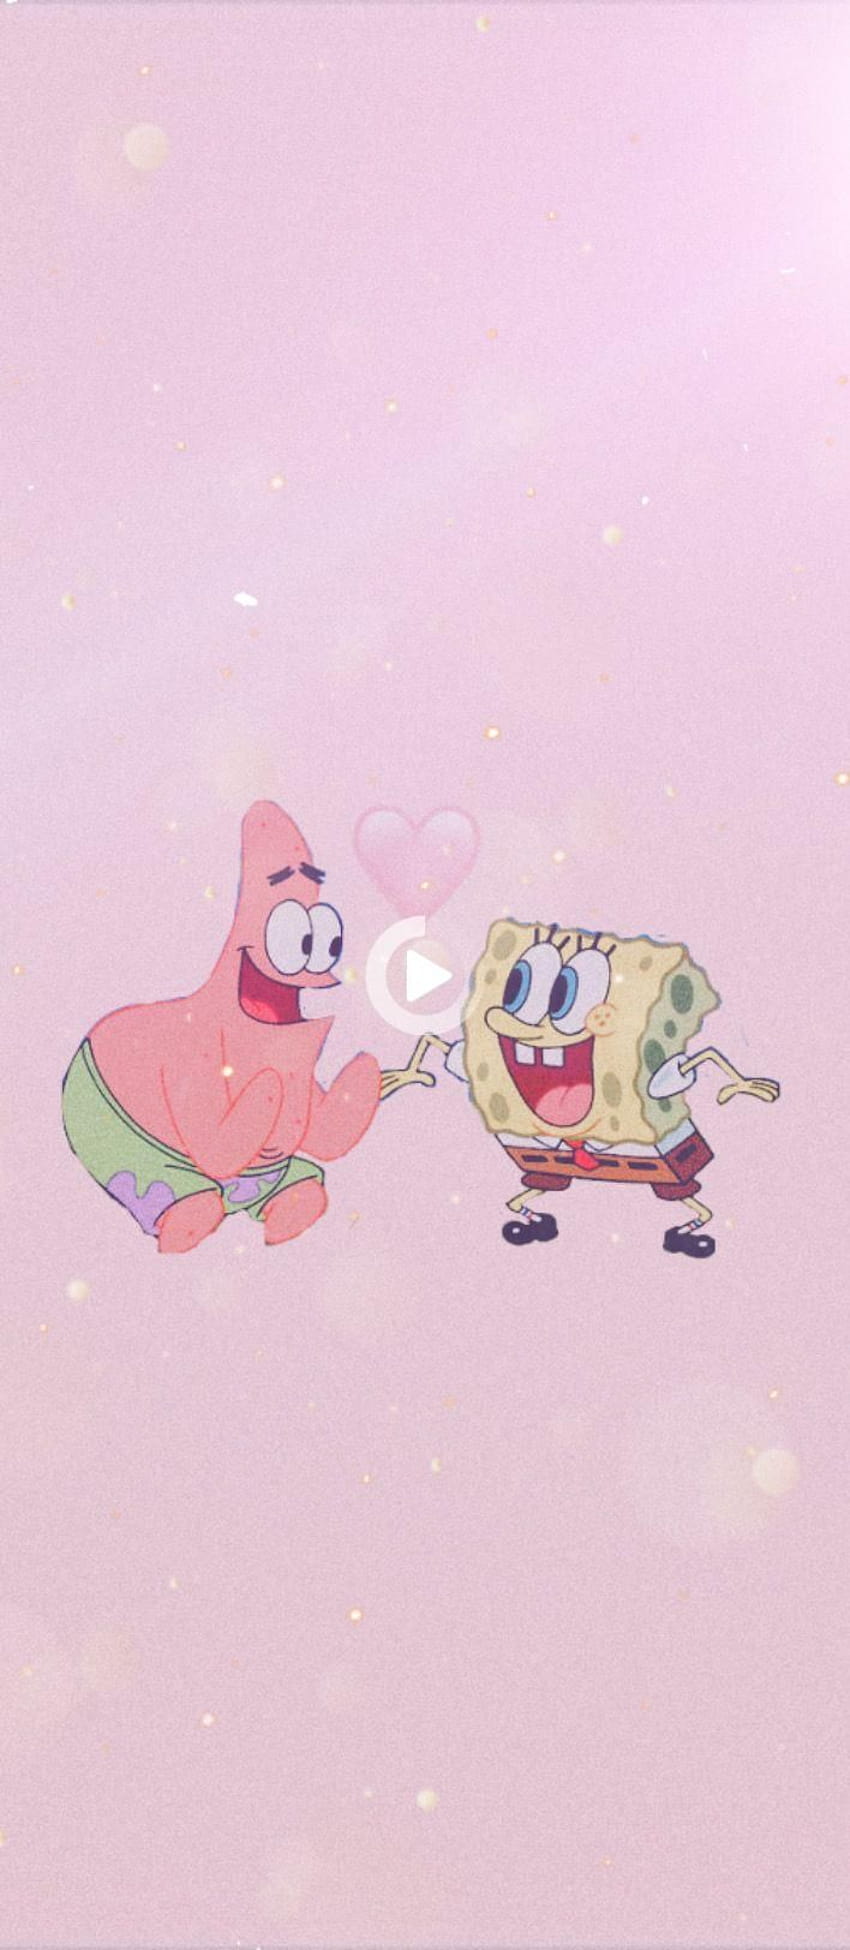 Aesthetic Spongebob Wallpaper For Phone with high-resolution 1080x1920 pixel. You can use this wallpaper for your iPhone 5, 6, 7, 8, X, XS, XR backgrounds, Mobile Screensaver, or iPad Lock Screen - Bestie